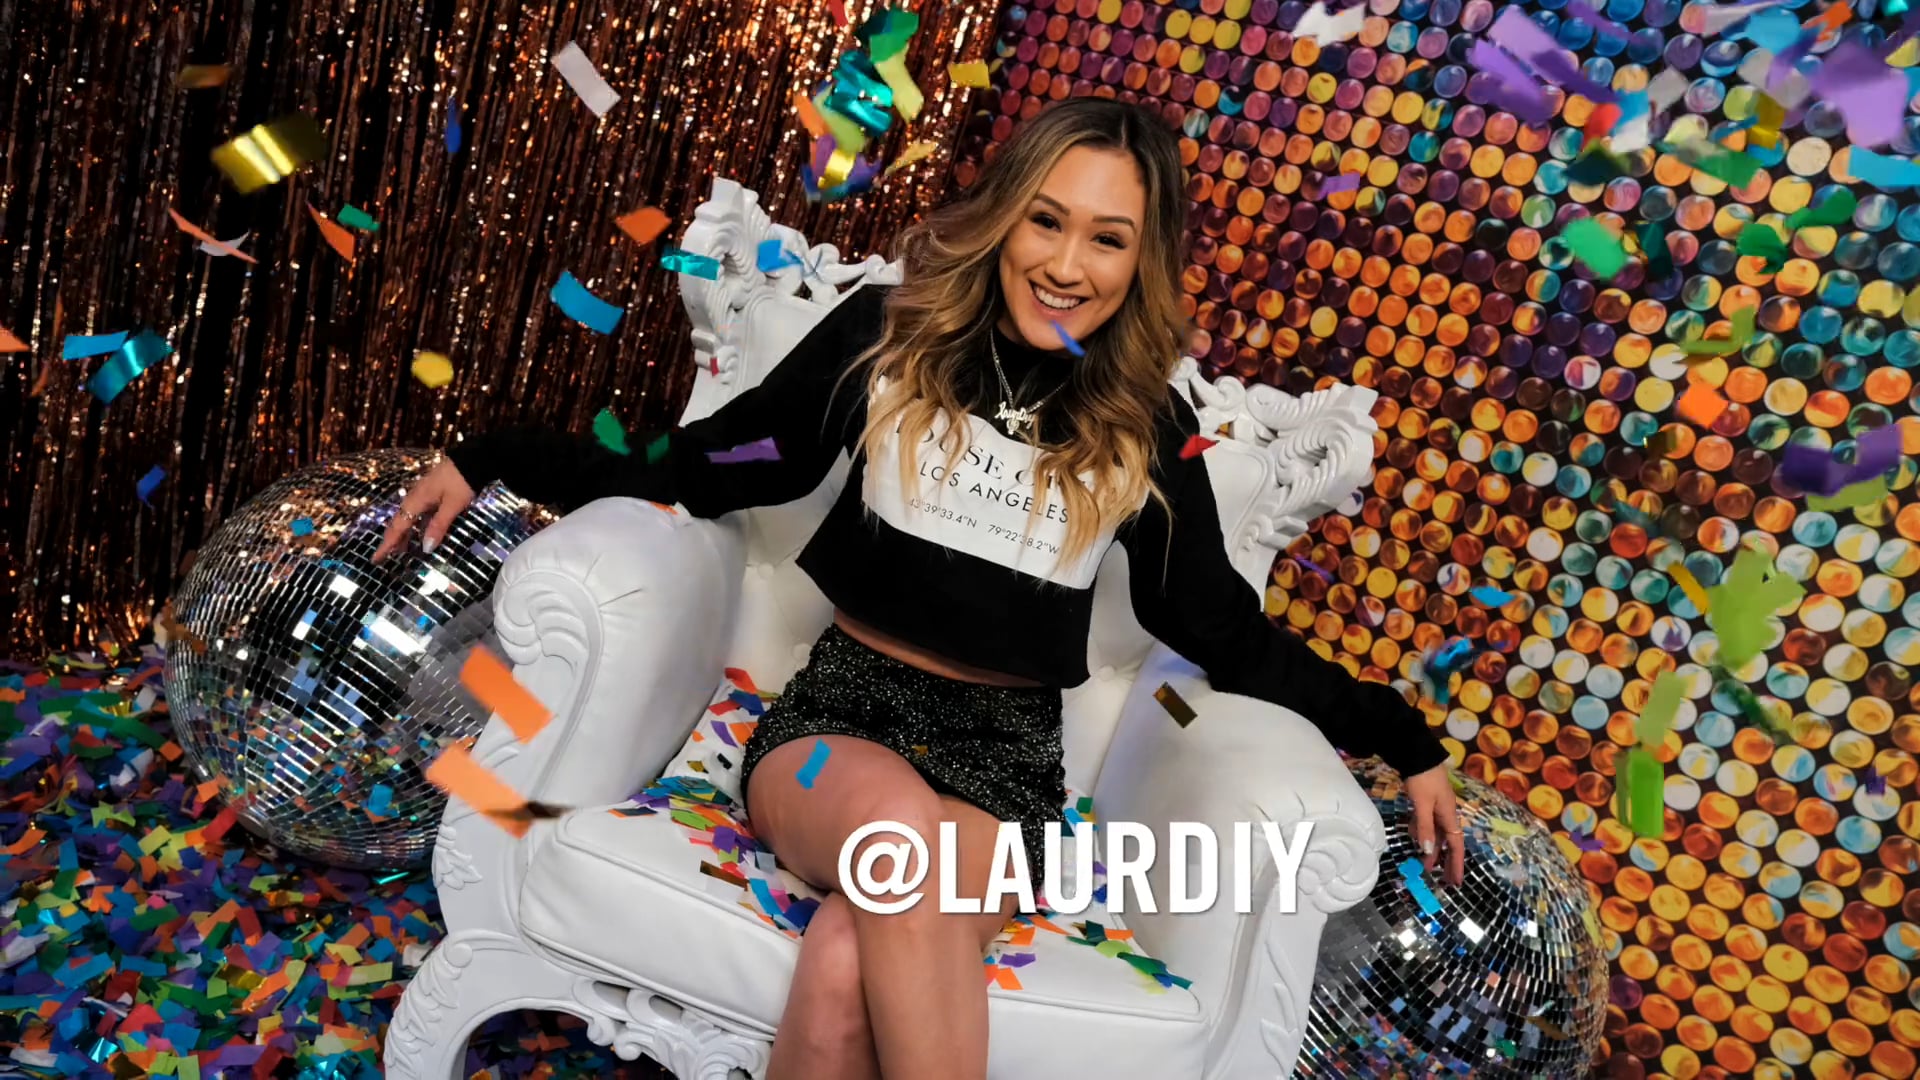 Off to Prom 2019 with @laurDIY